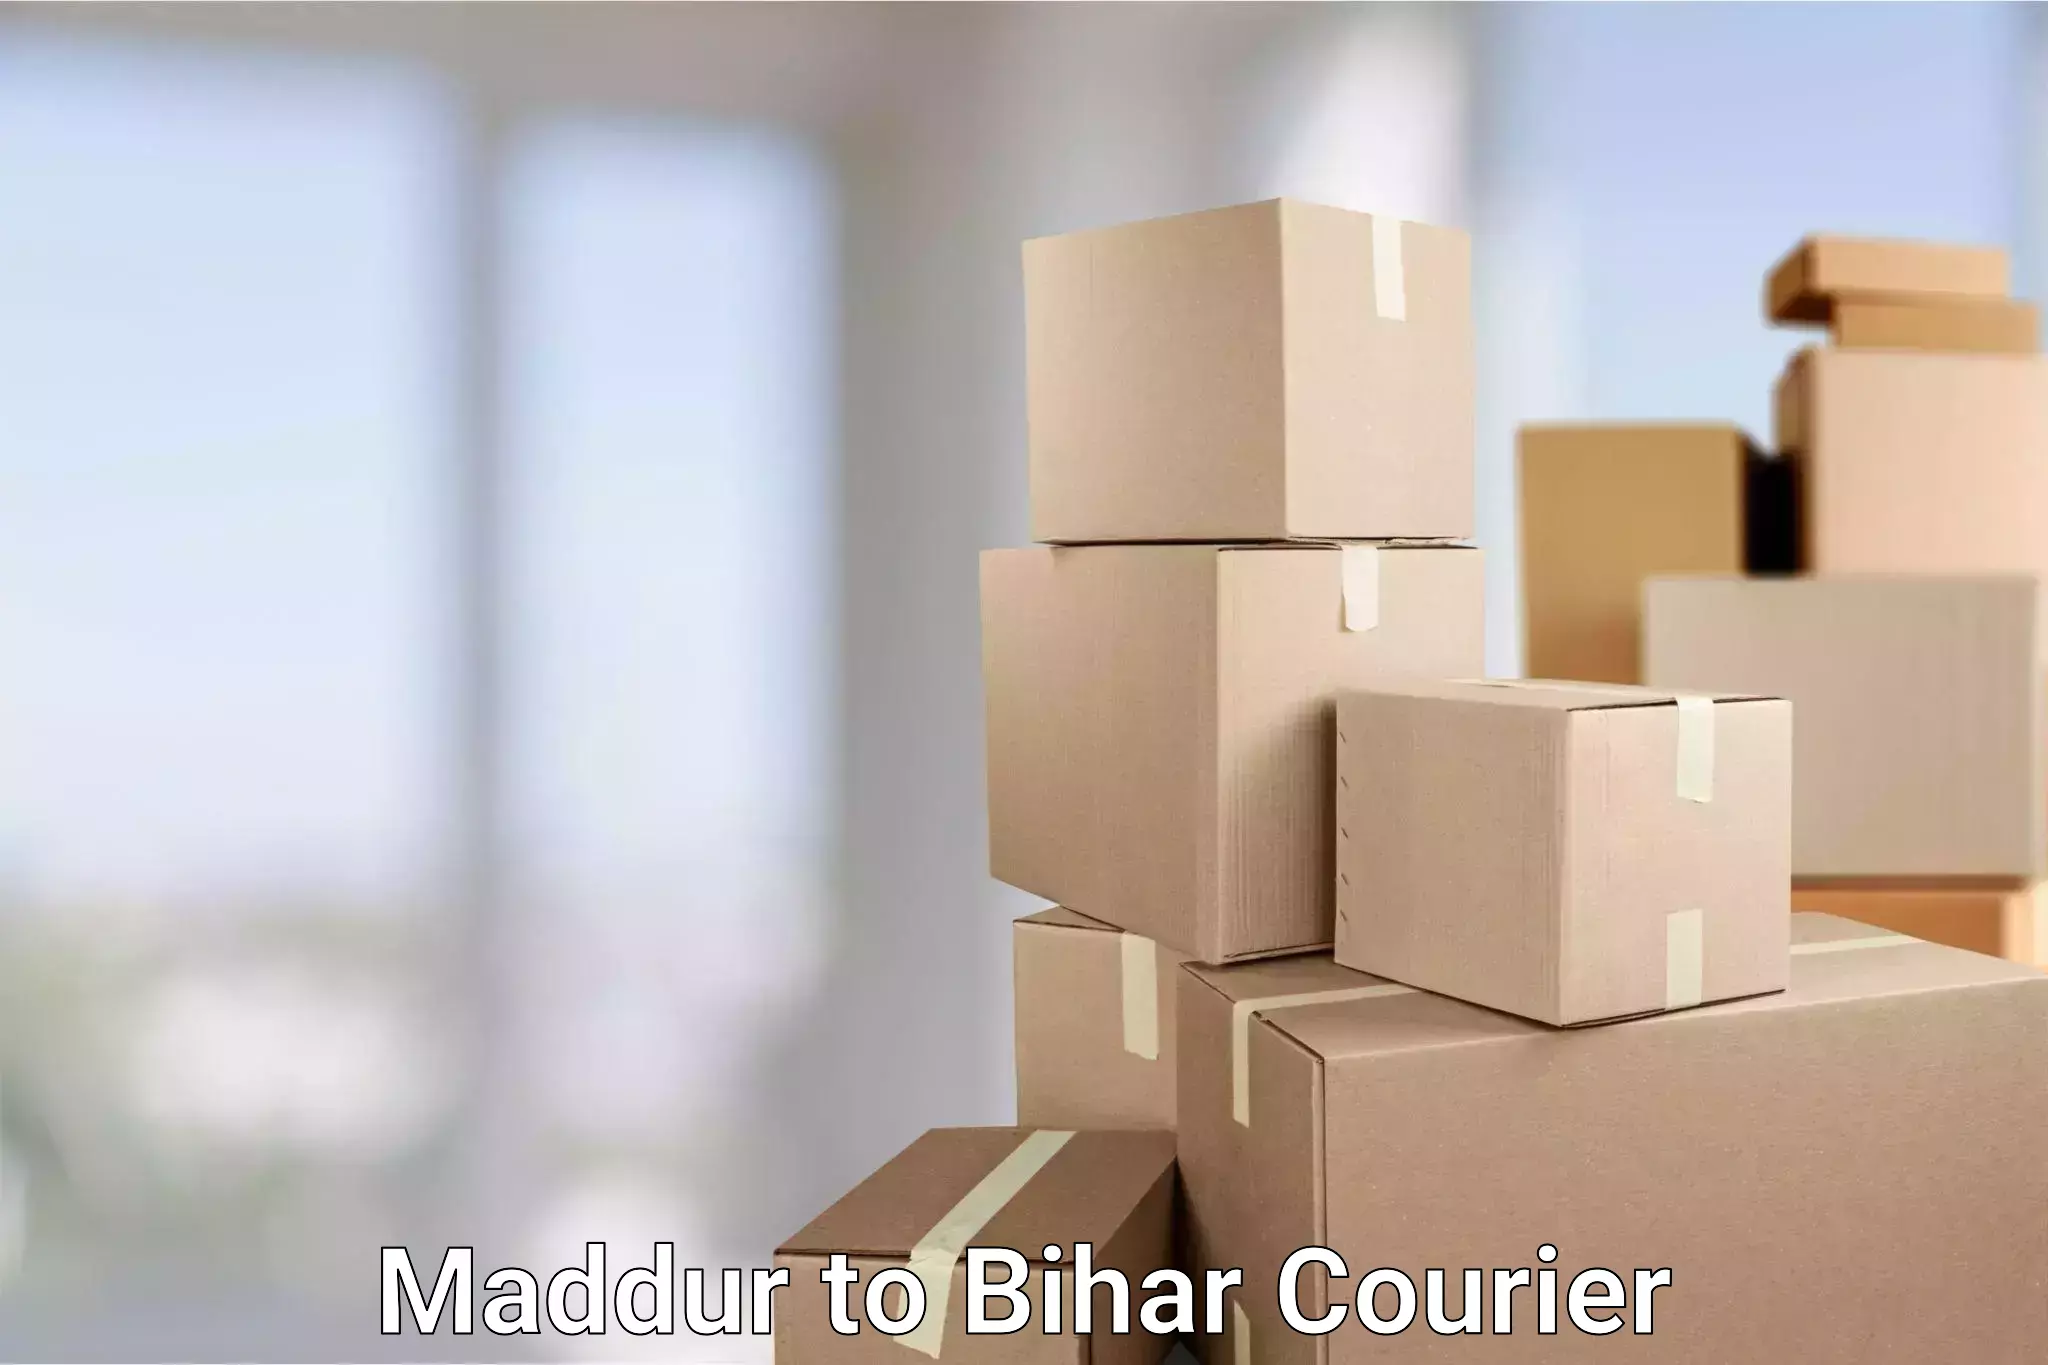 Automated shipping processes Maddur to Bihar